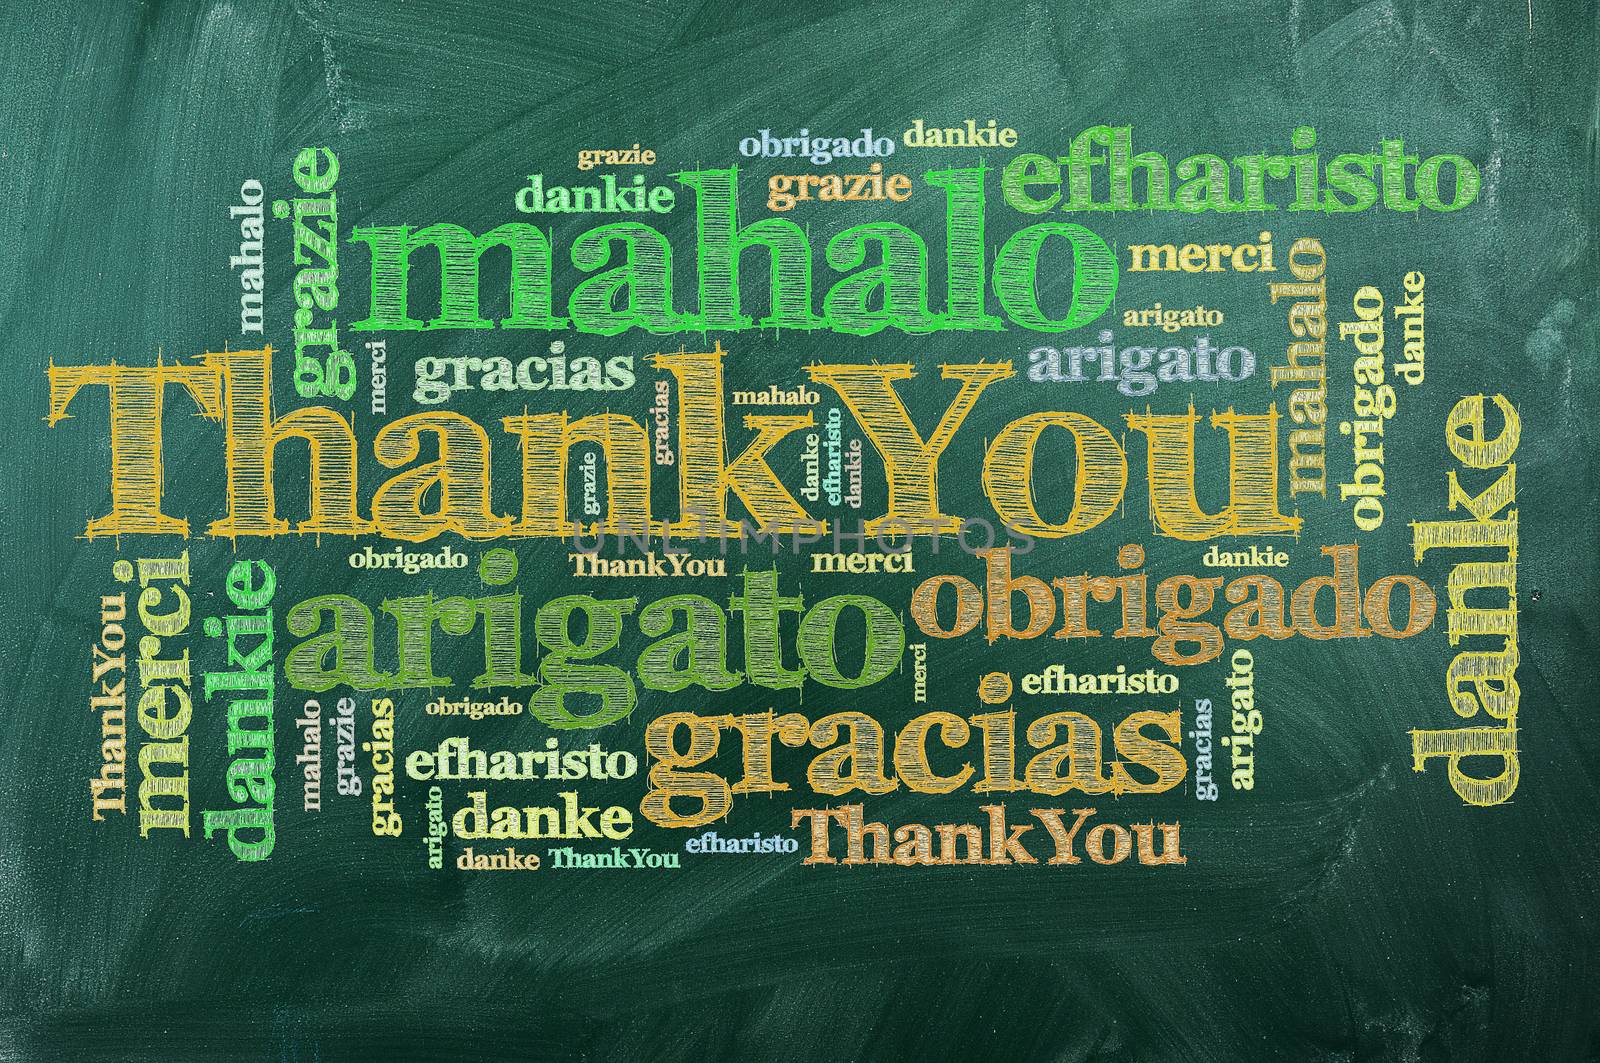 thank you in different languages on green chalkboard